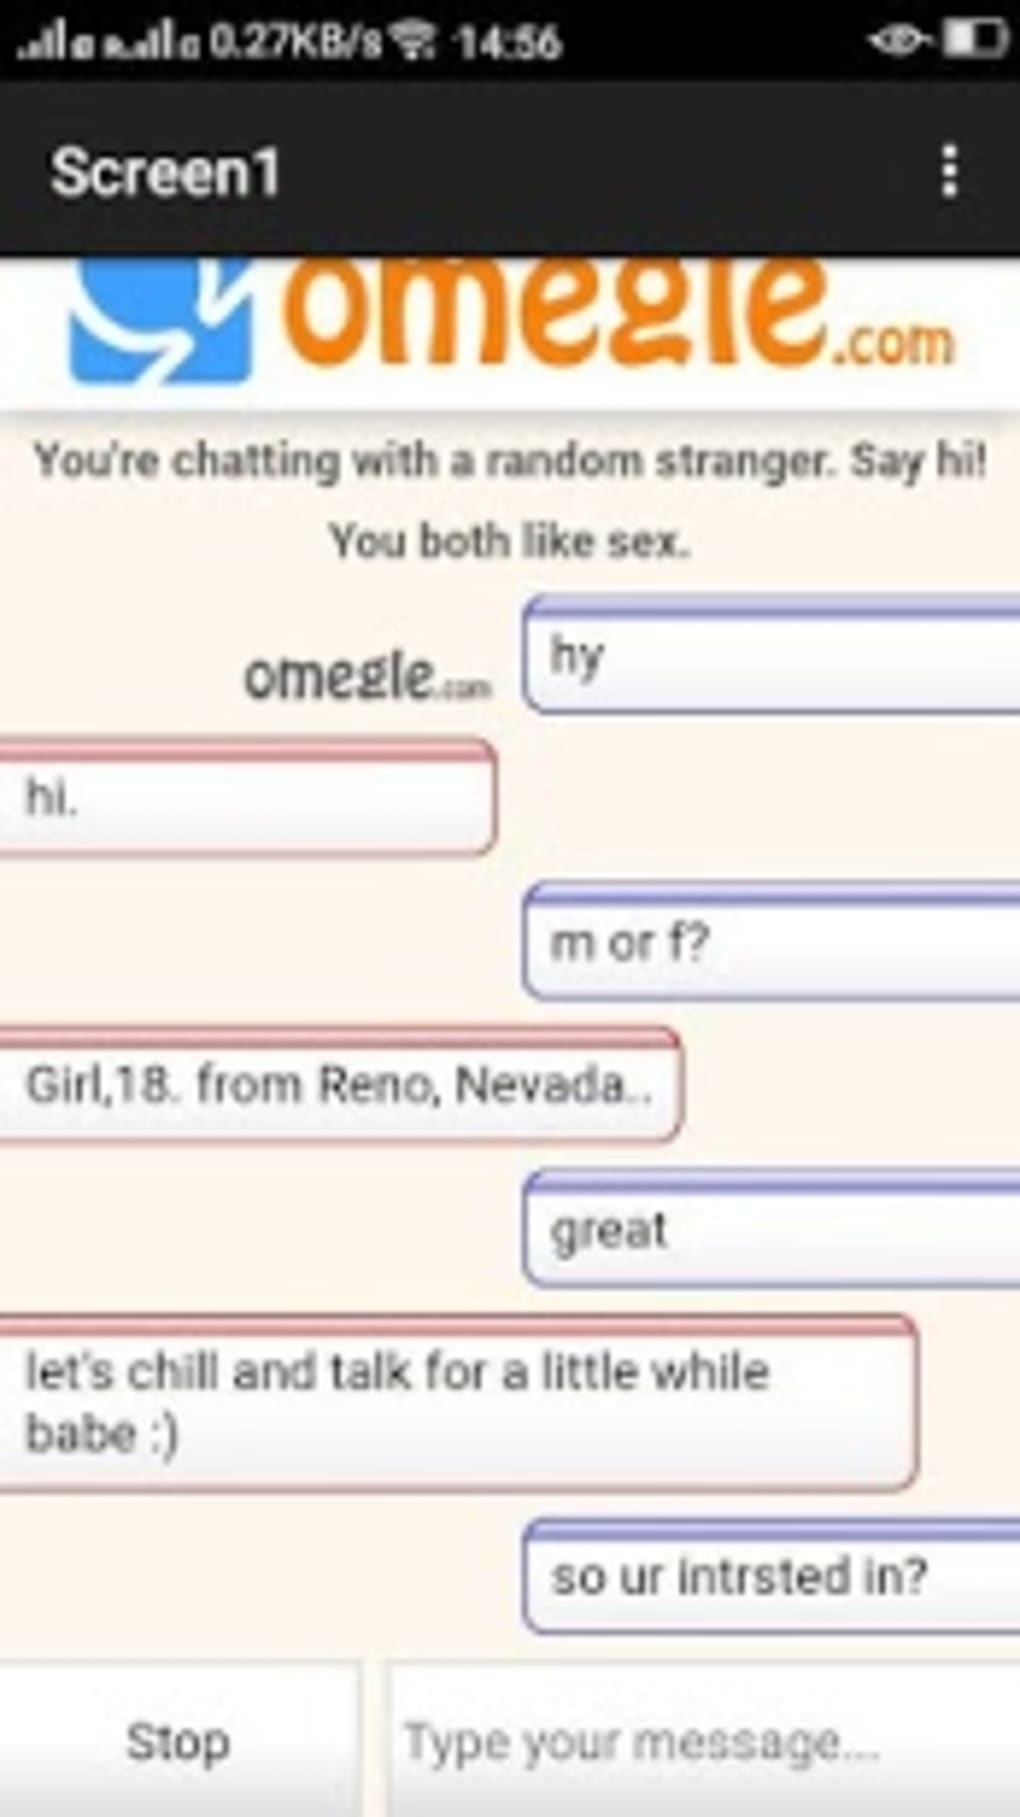 Omegle Chat.